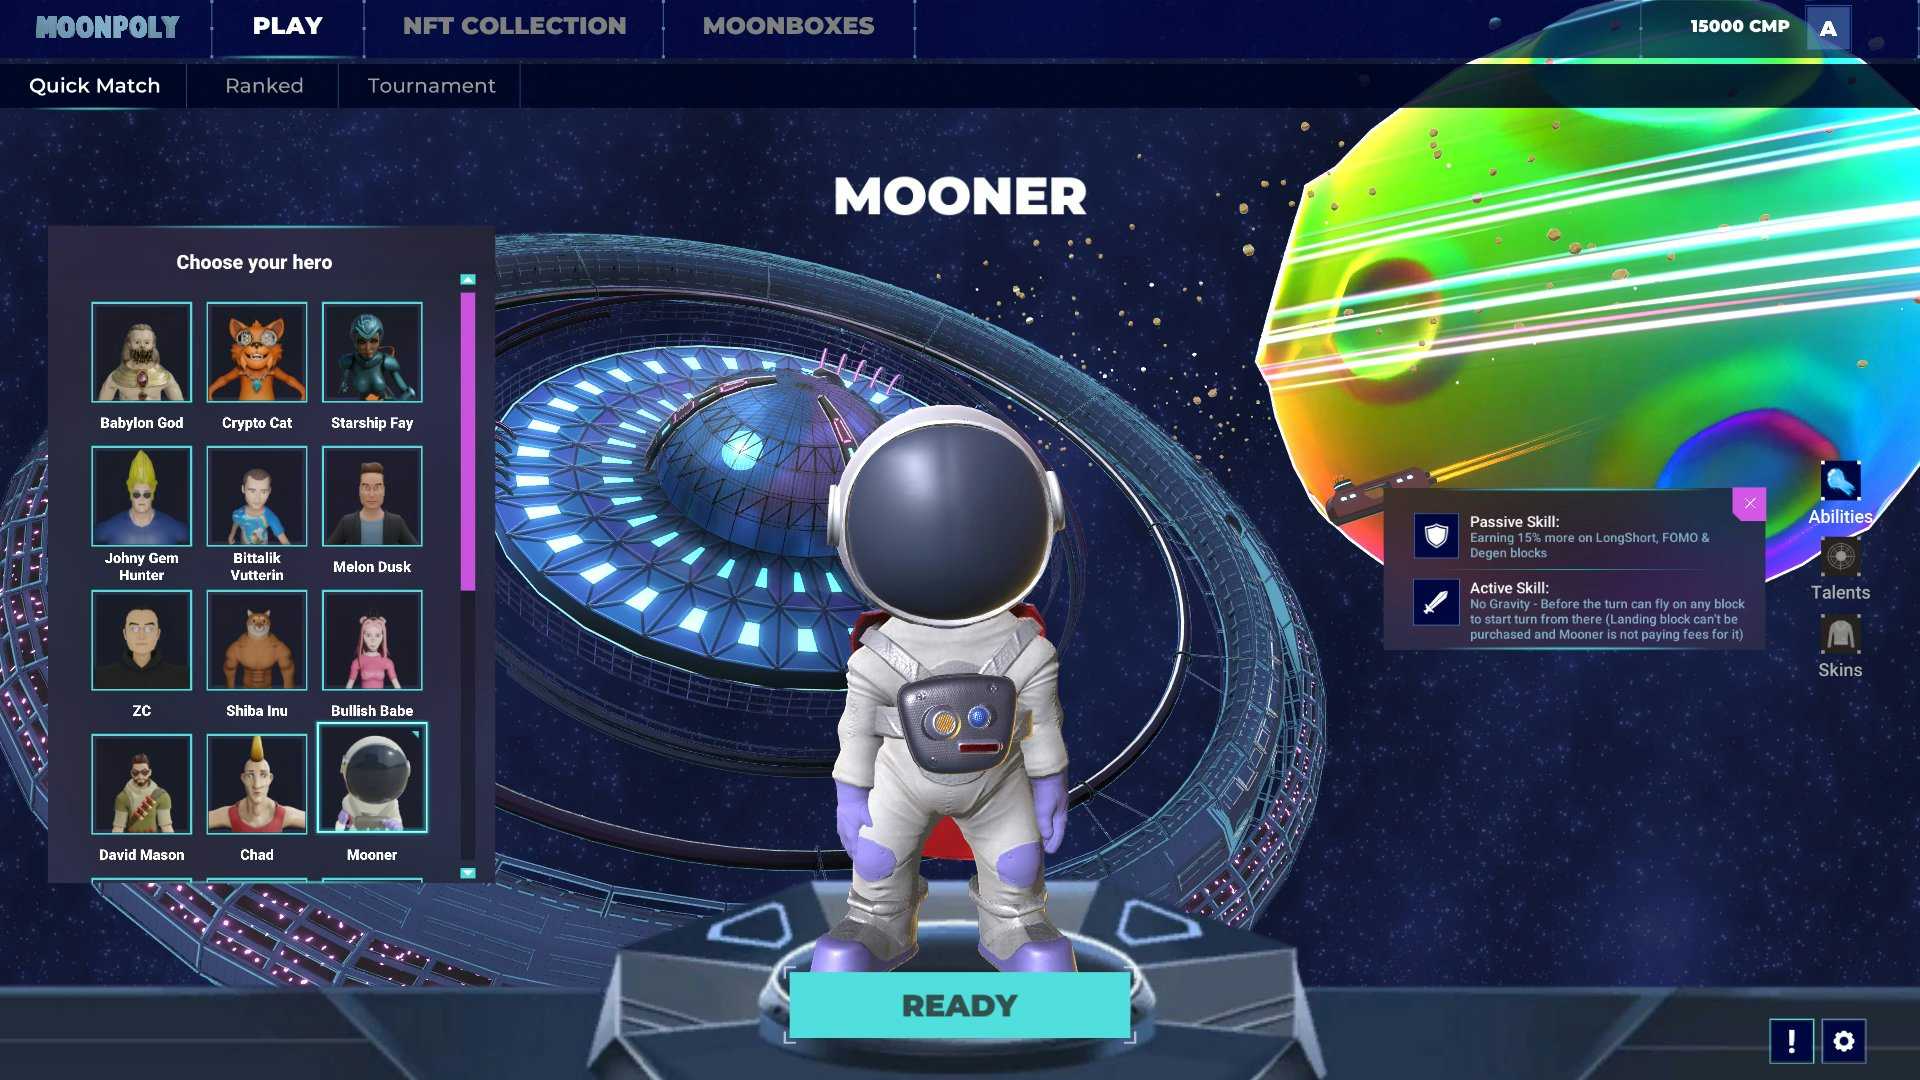 game image from Moonpoly